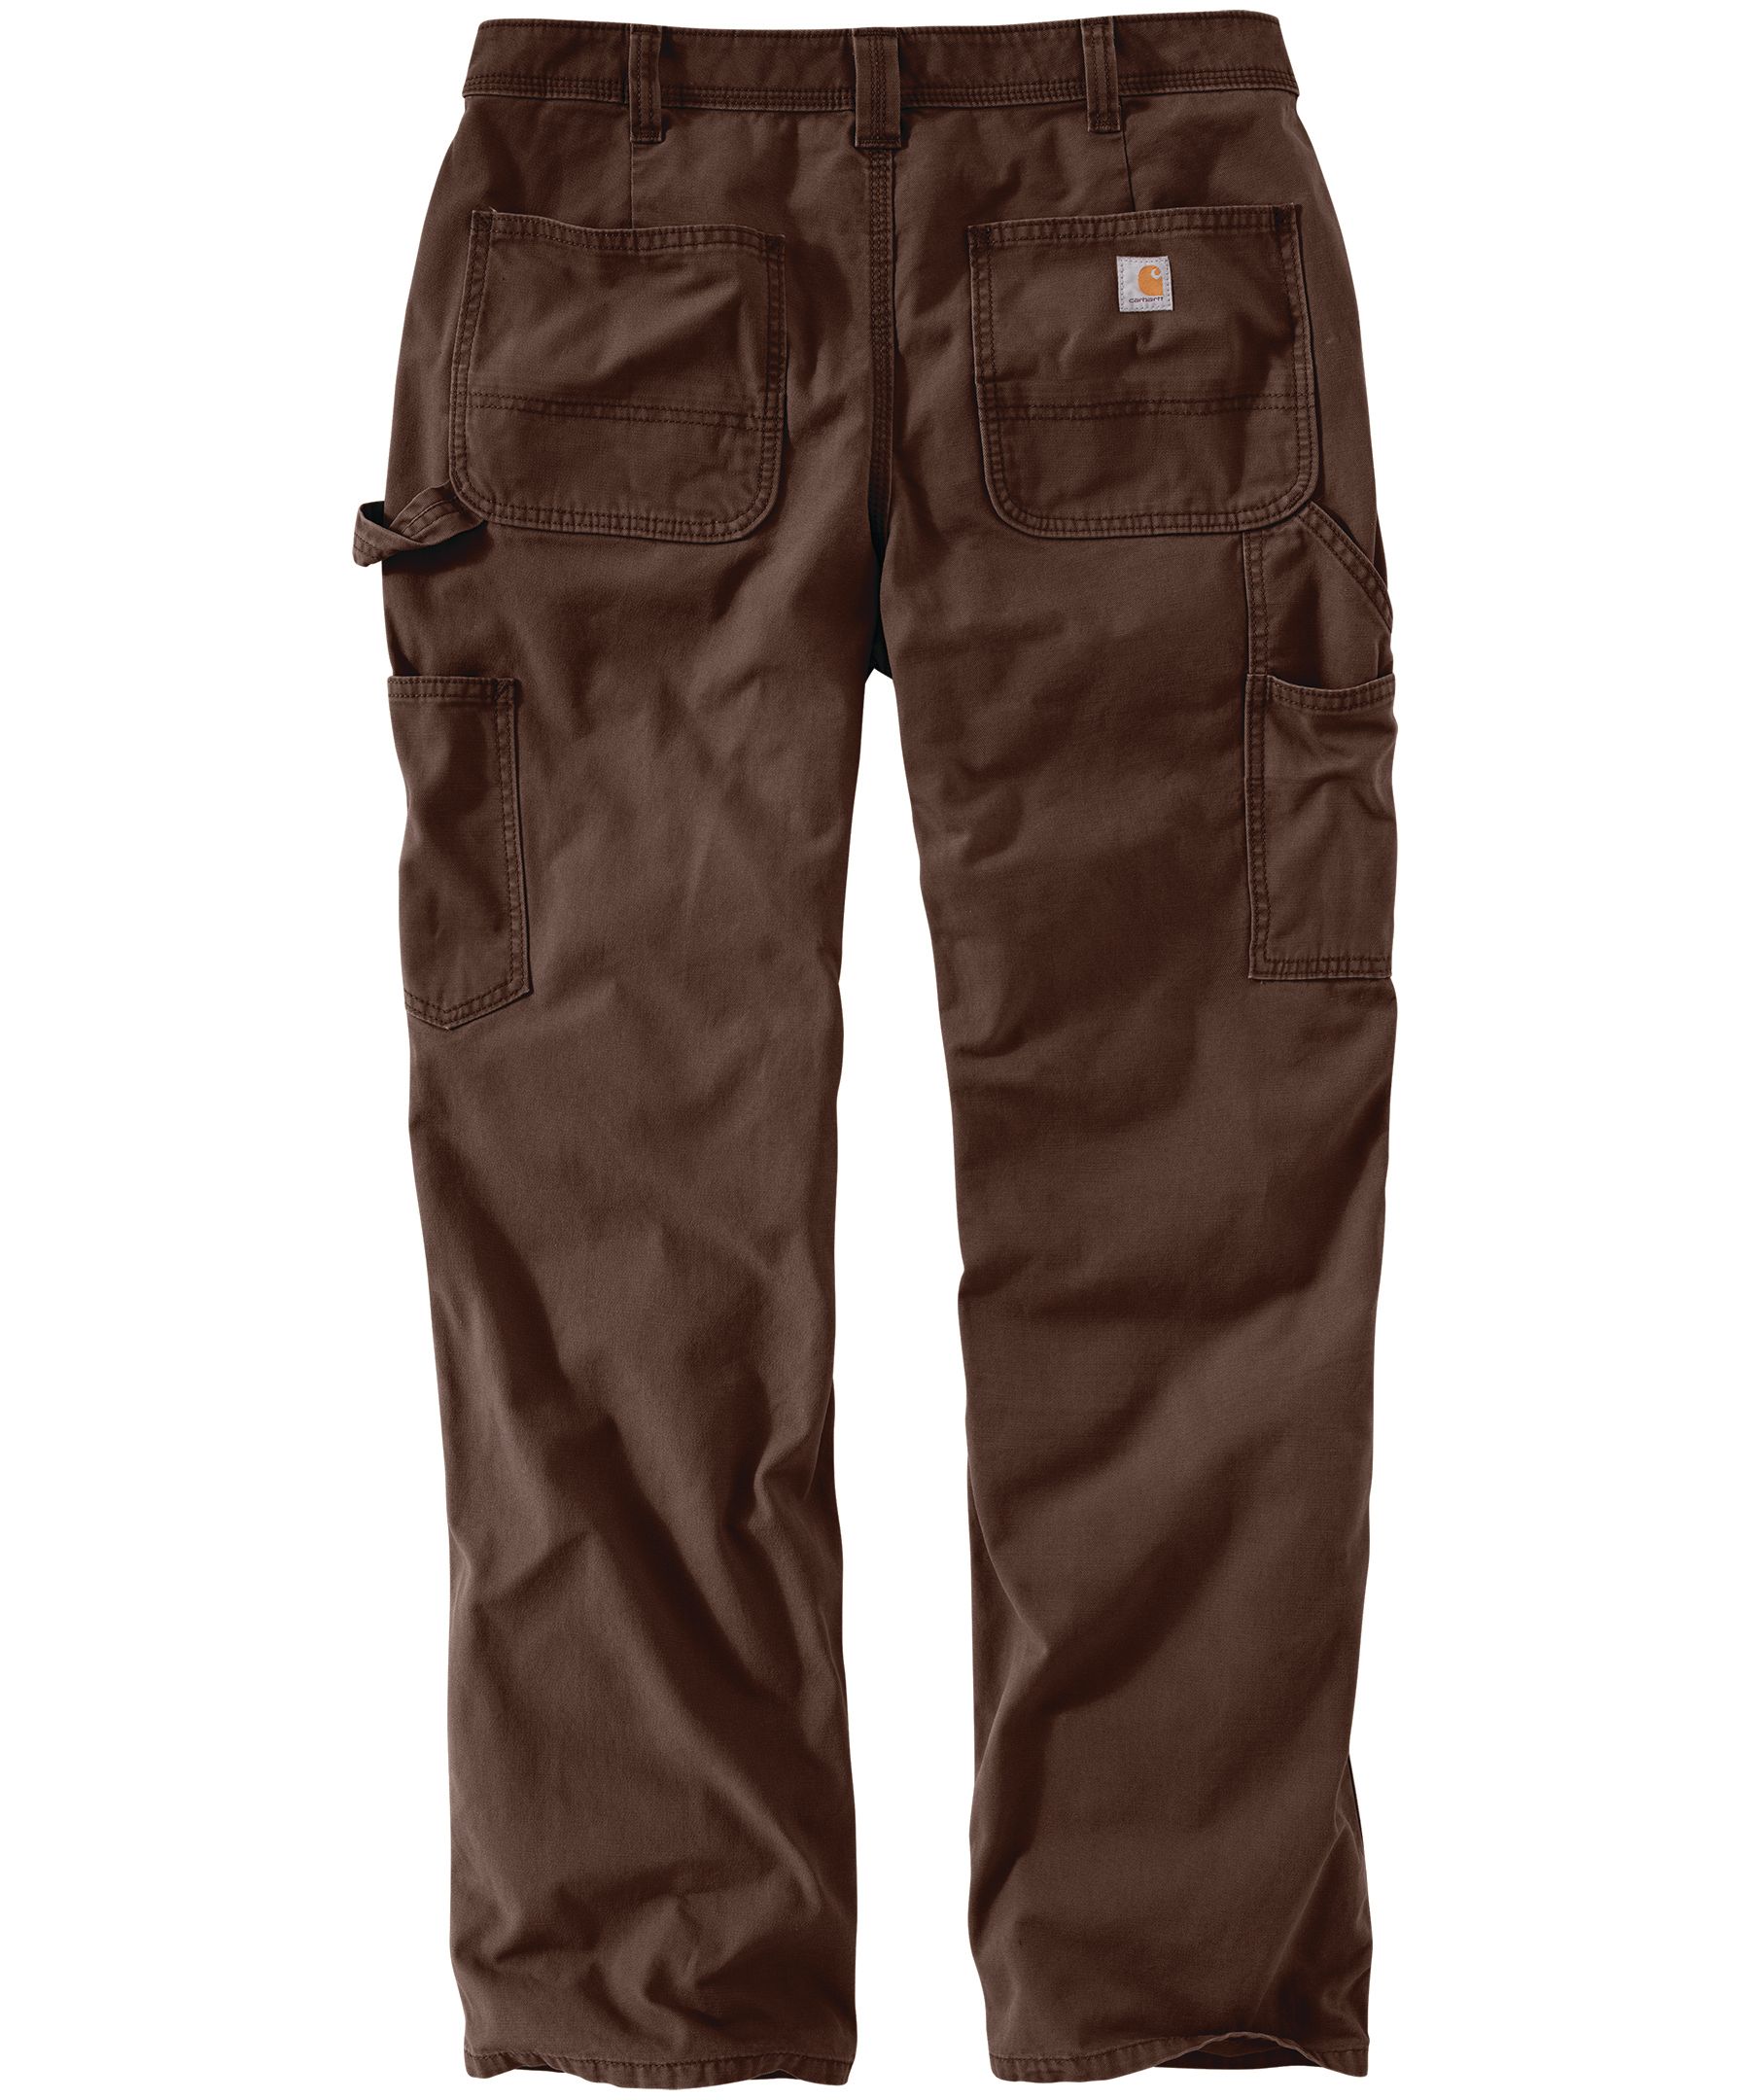 https://media-www.marks.com/product/marks-work-wearhouse/industrial-world/workwear/410015010404/carhartt-women-s-rugged-flex-mid-rise-relaxed-fit-elastic-waistband-canvas-work-pants-29b15826-2e6f-4760-888e-6b9063889bc2-jpgrendition.jpg?imdensity=1&imwidth=1244&impolicy=mZoom